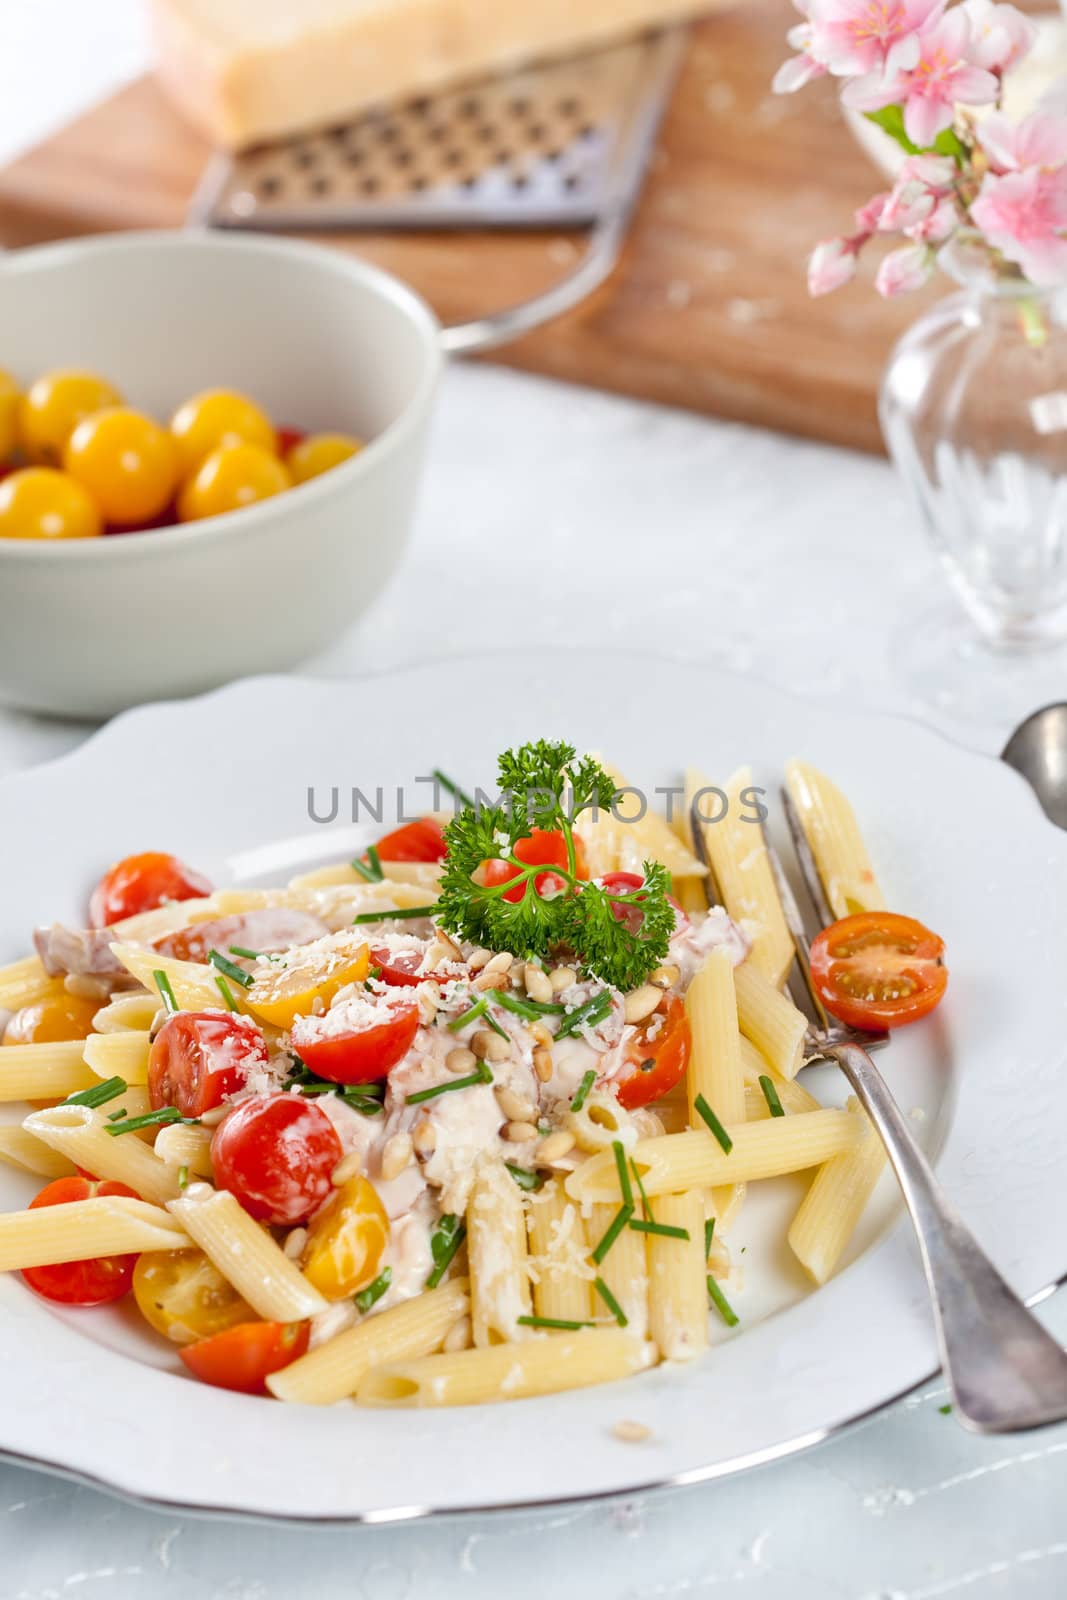 Delicious pasta dish by Fotosmurf